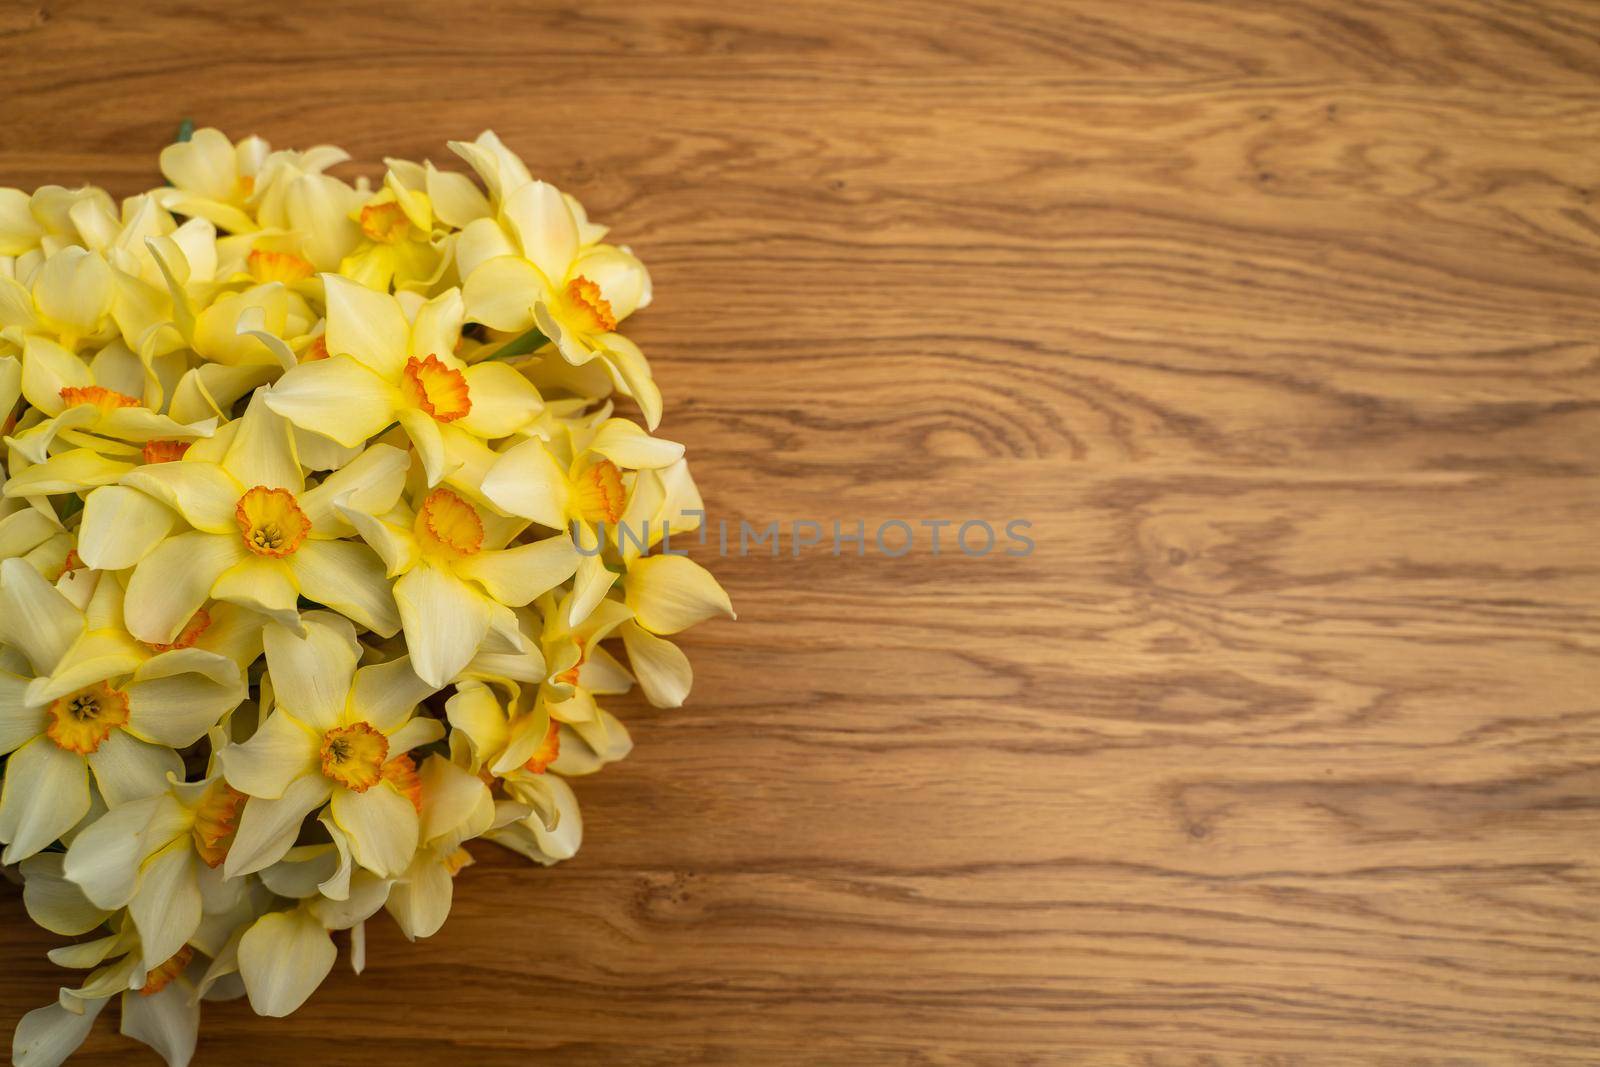 On the left is a large bouquet of yellow daffodils on an wooden background. Copy space. Can be used as a card, background for screensavers, greetings